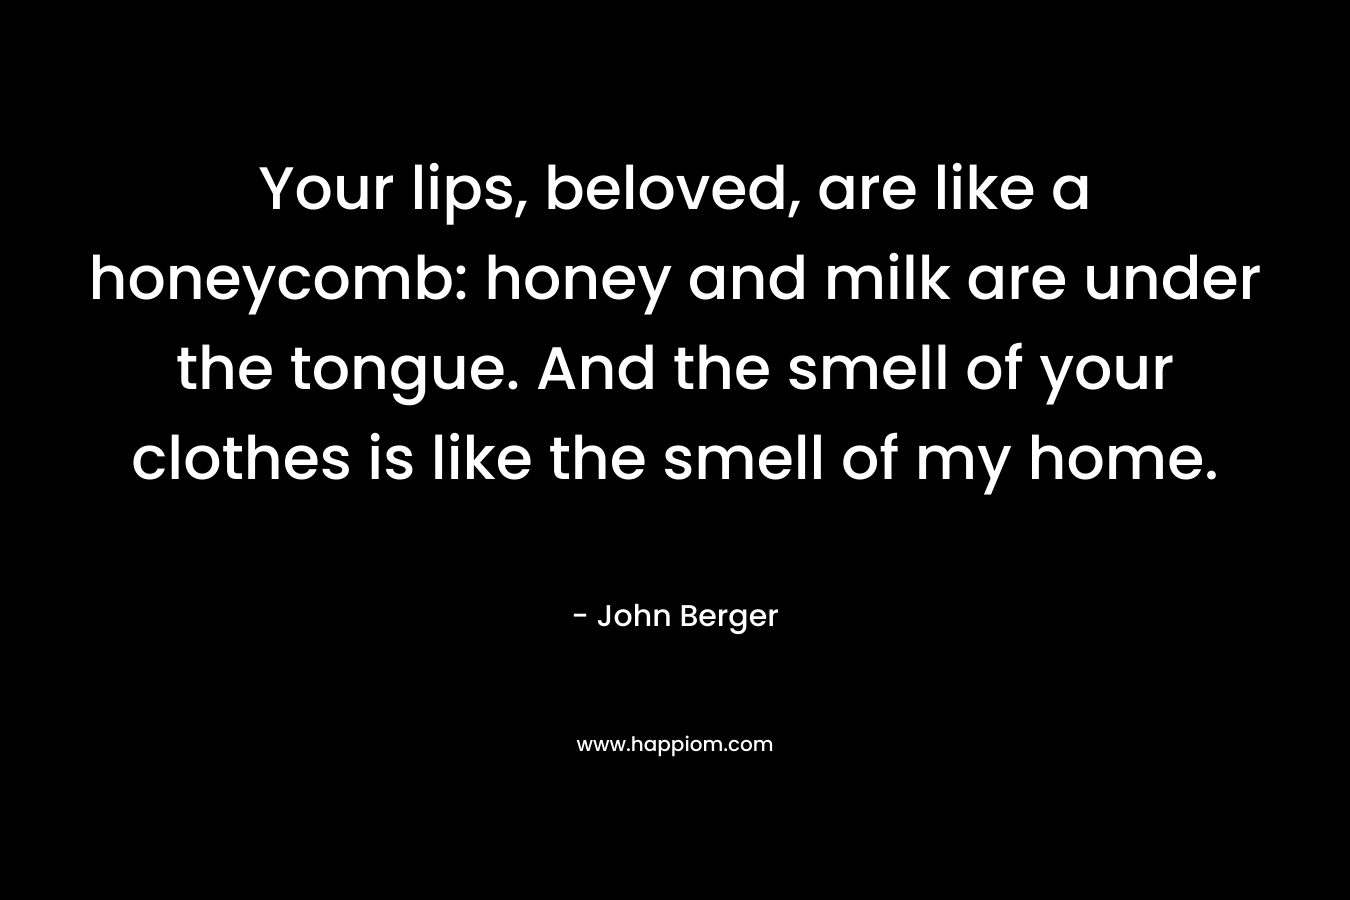 Your lips, beloved, are like a honeycomb: honey and milk are under the tongue. And the smell of your clothes is like the smell of my home. – John Berger